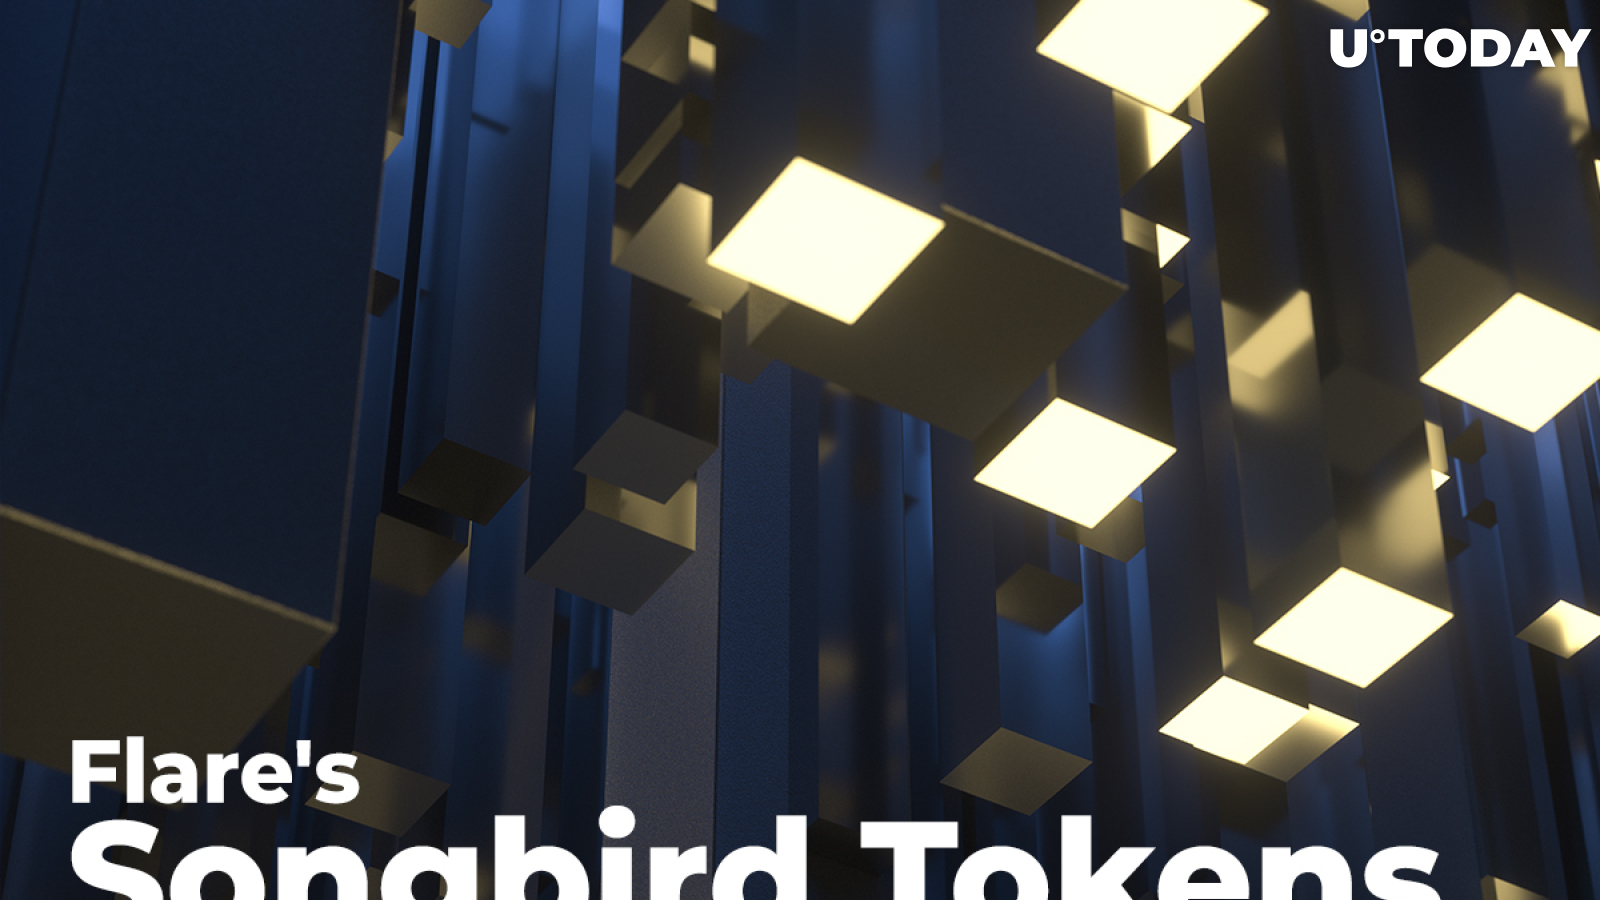 Flare's Songbird Tokens Now Integrated by Institution-Grade Custody